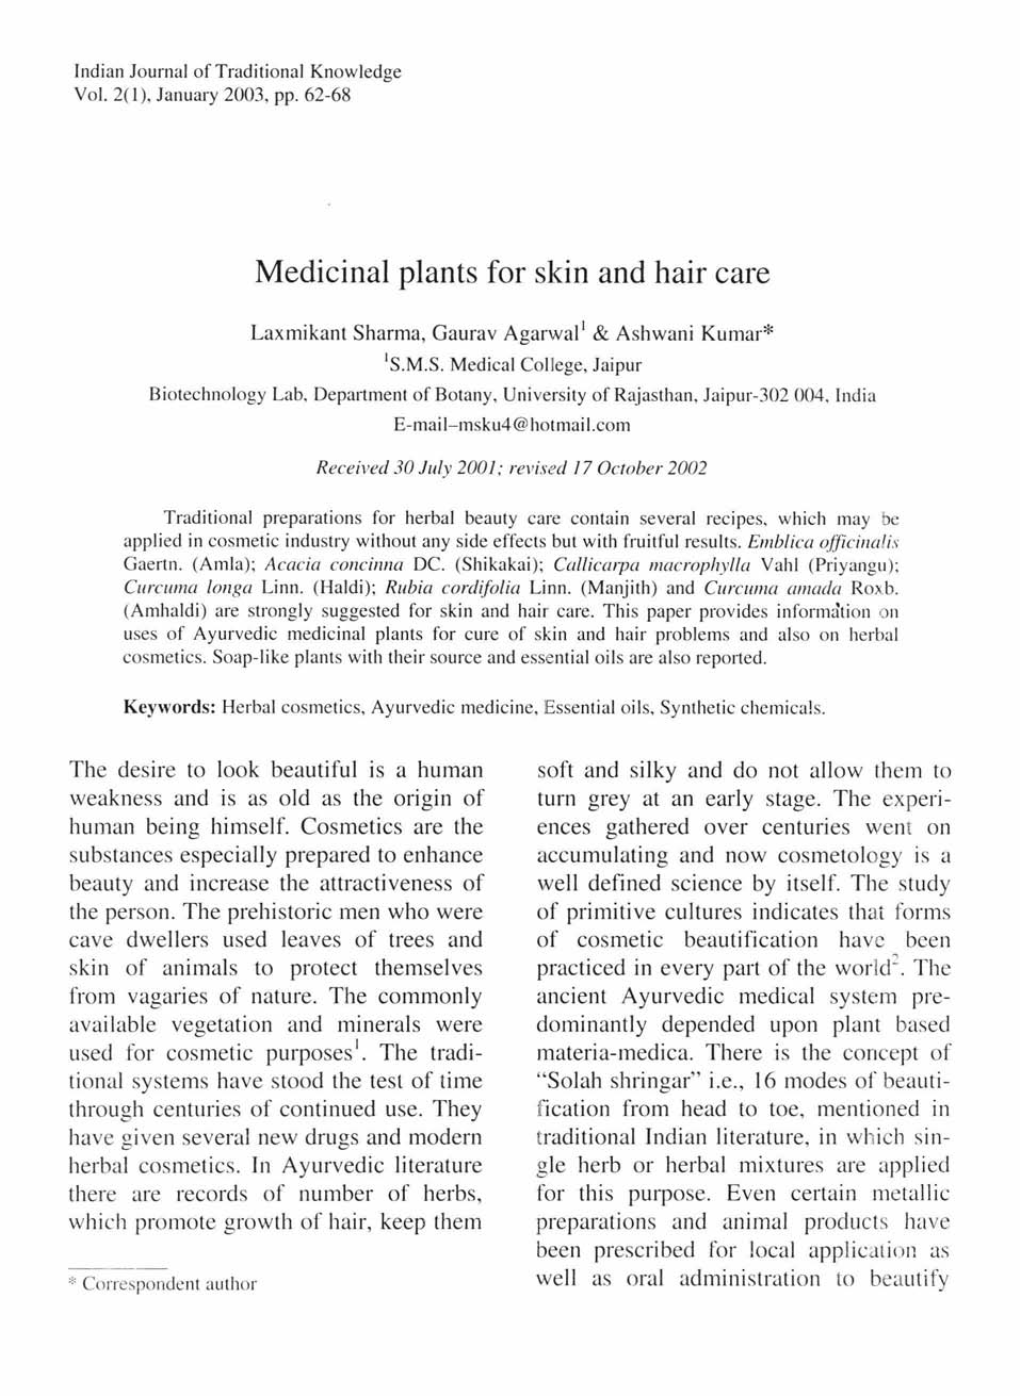 Medicinal Plants for Skin and Hair Care